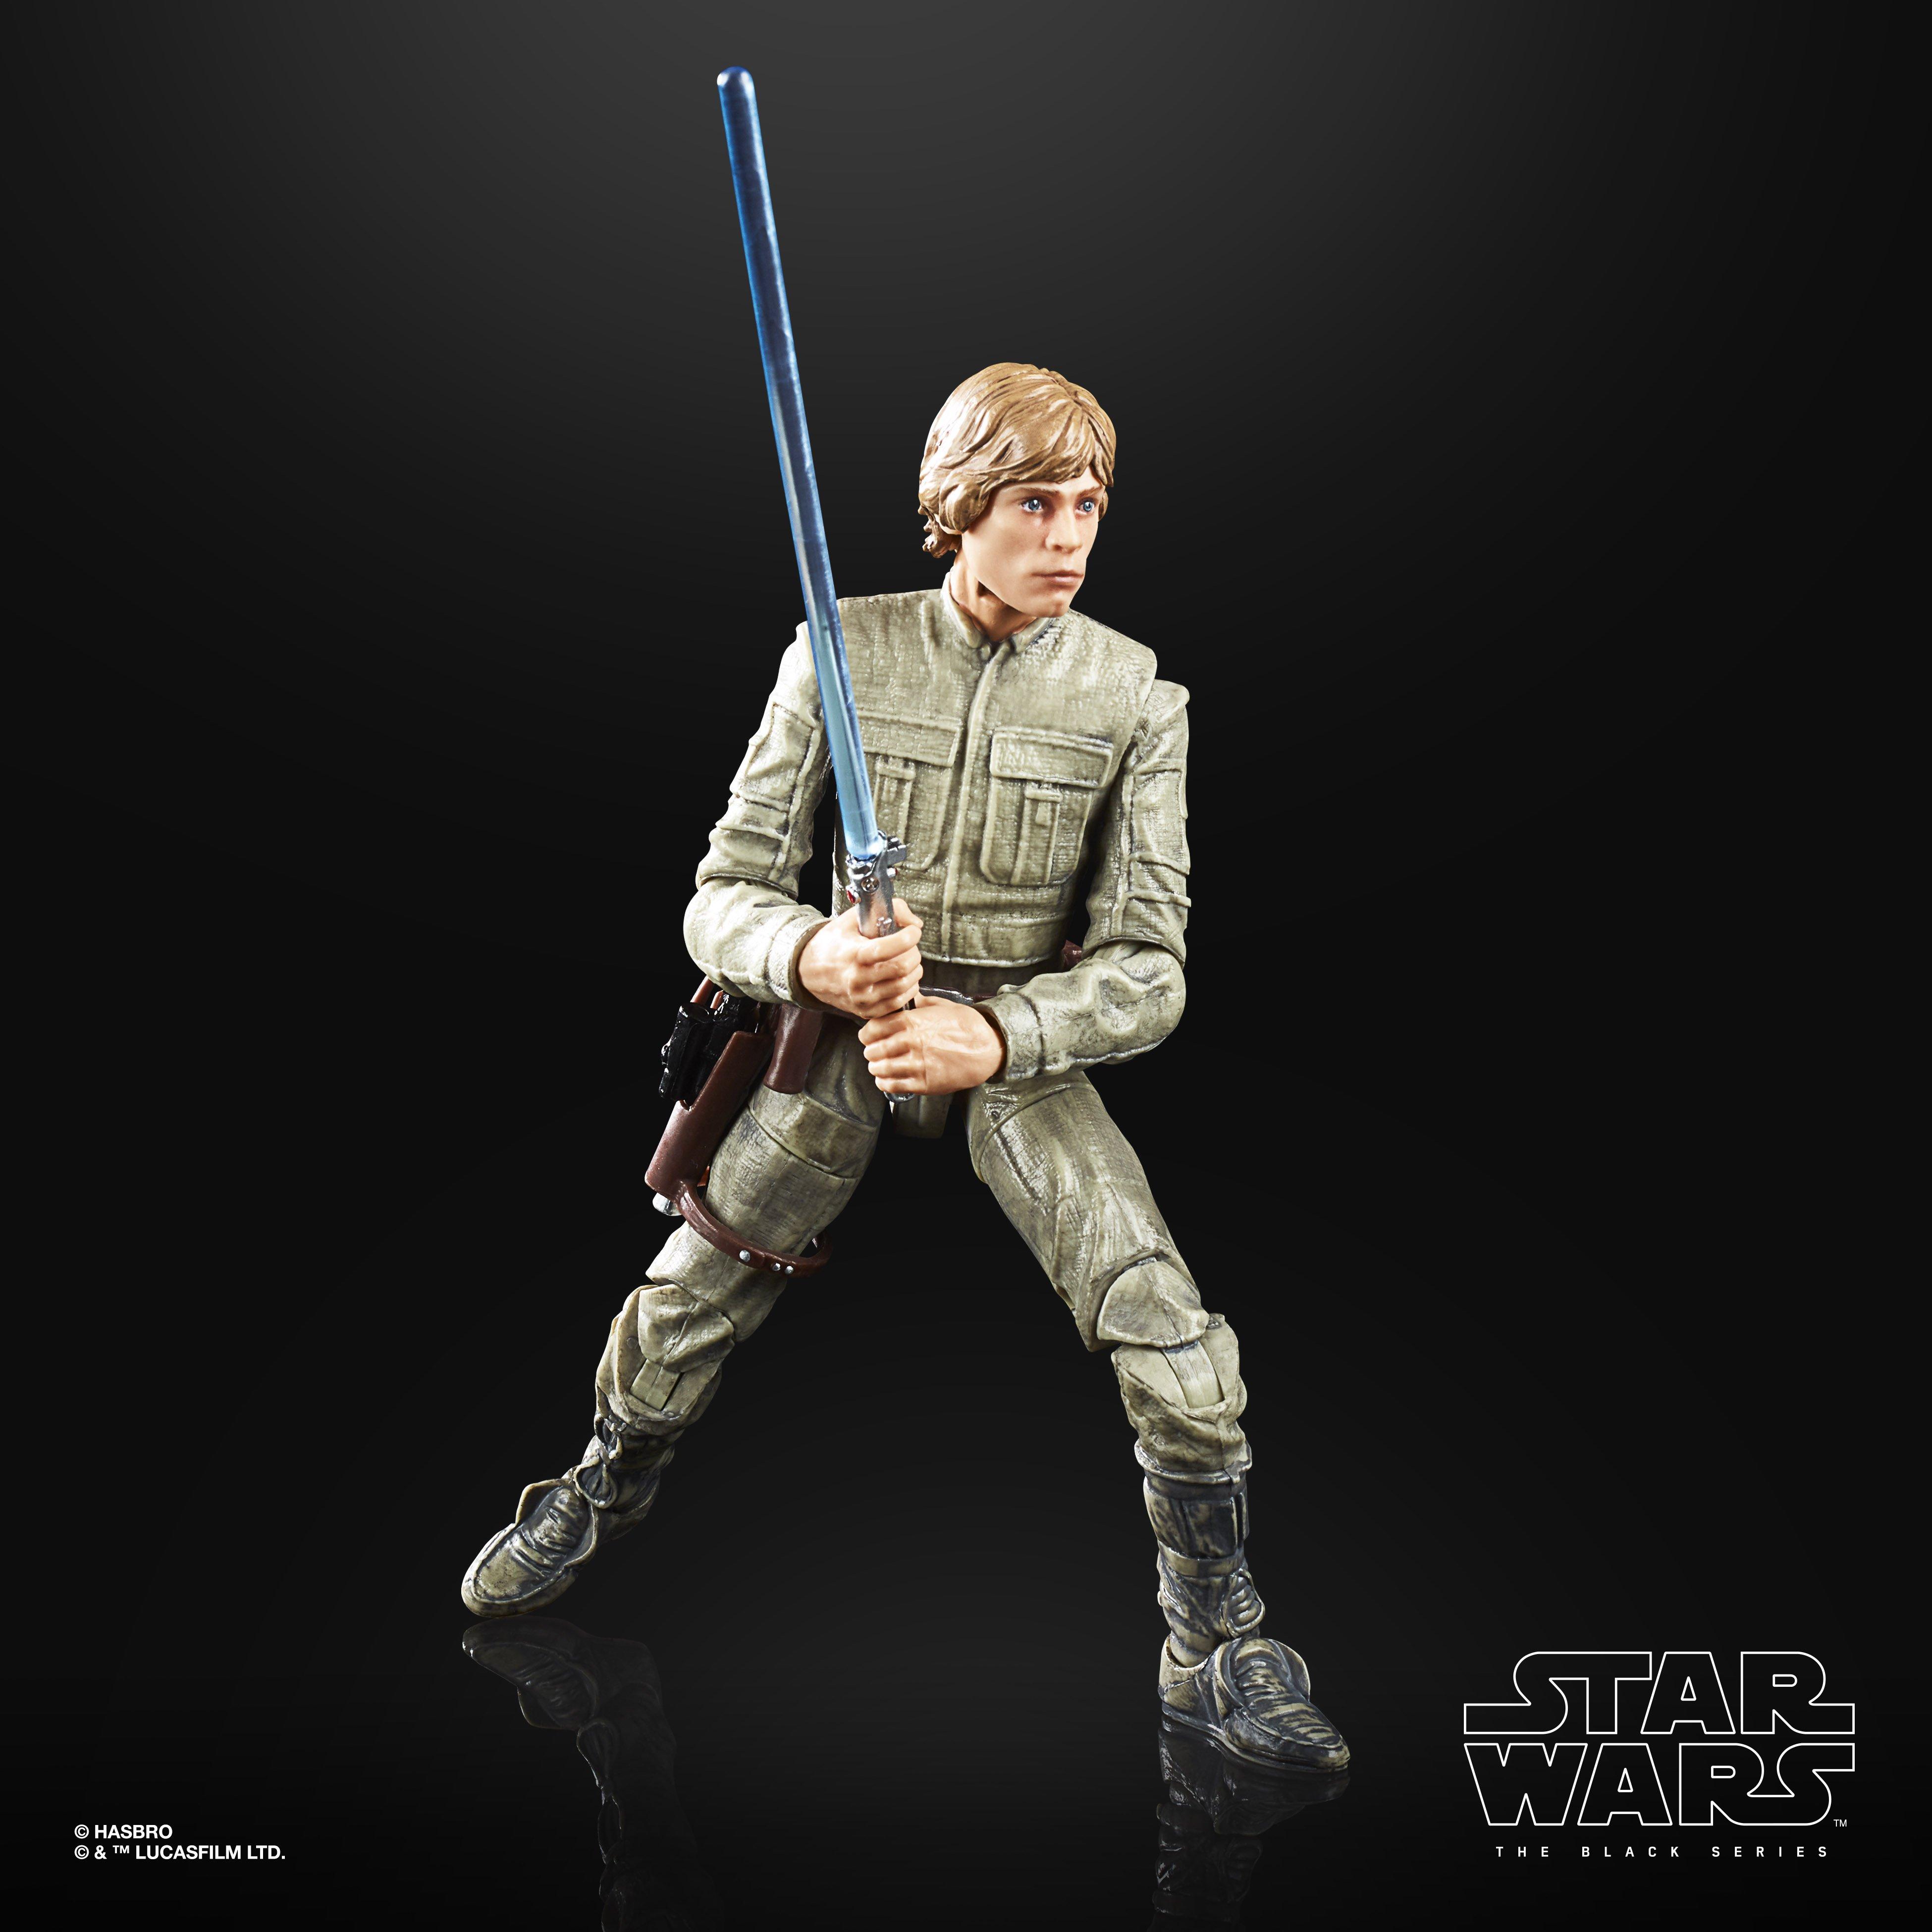 Jedi Training 6-Inch-Scale The Empire Strikes Back 40th Anniversary Figures Star Wars The Black Series Luke Skywalker and Yoda 